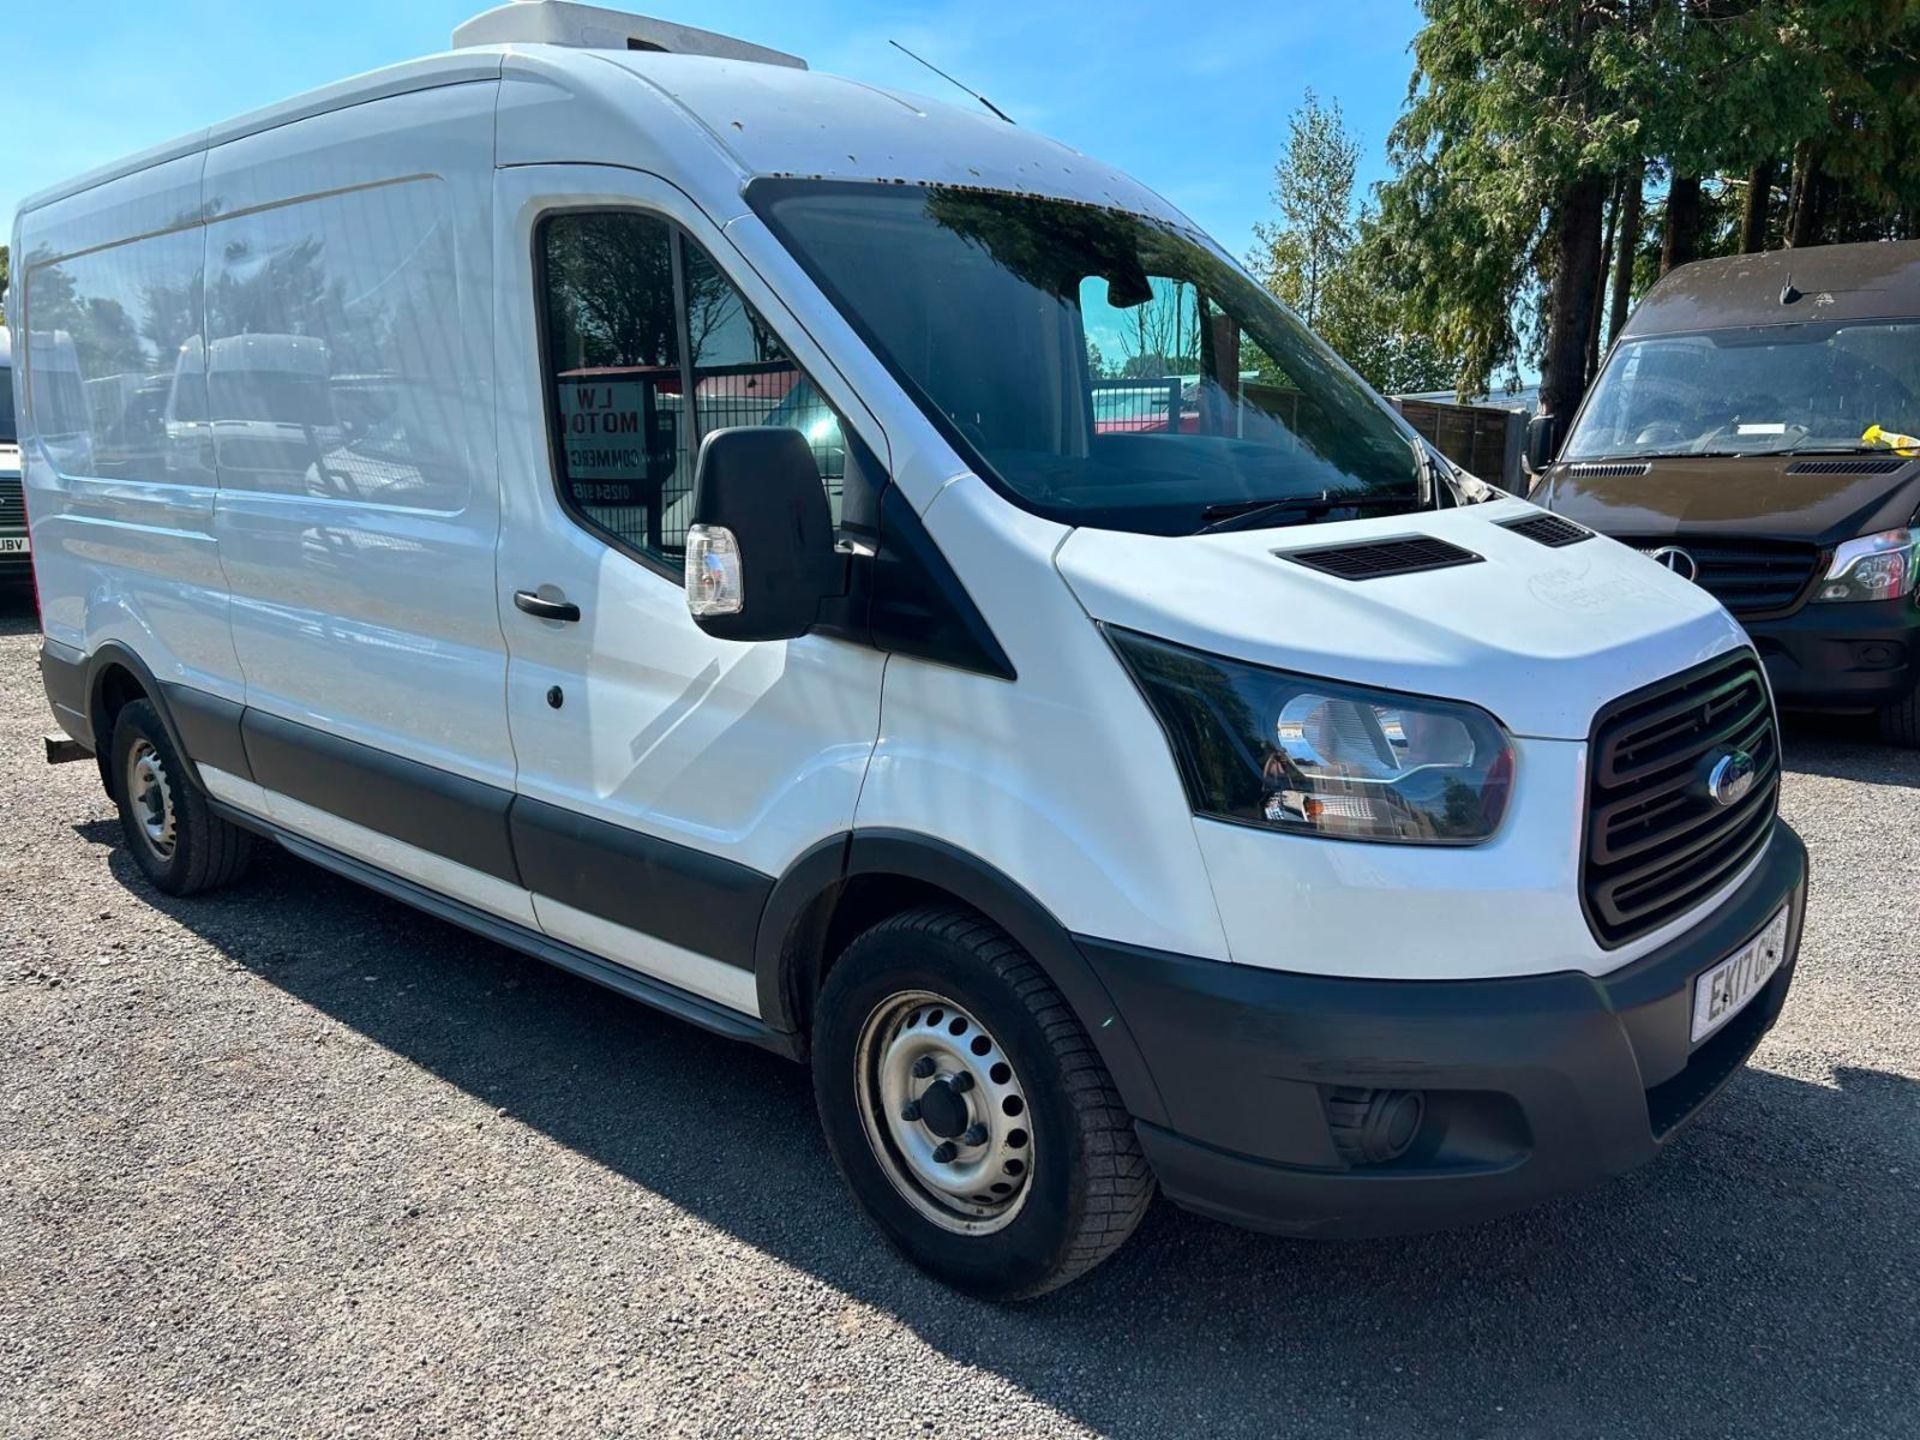 >>>SPECIAL CLEARANCE<<< 2017 FORD TRANSIT T350 ECOBLUE RWD 130 L3H3